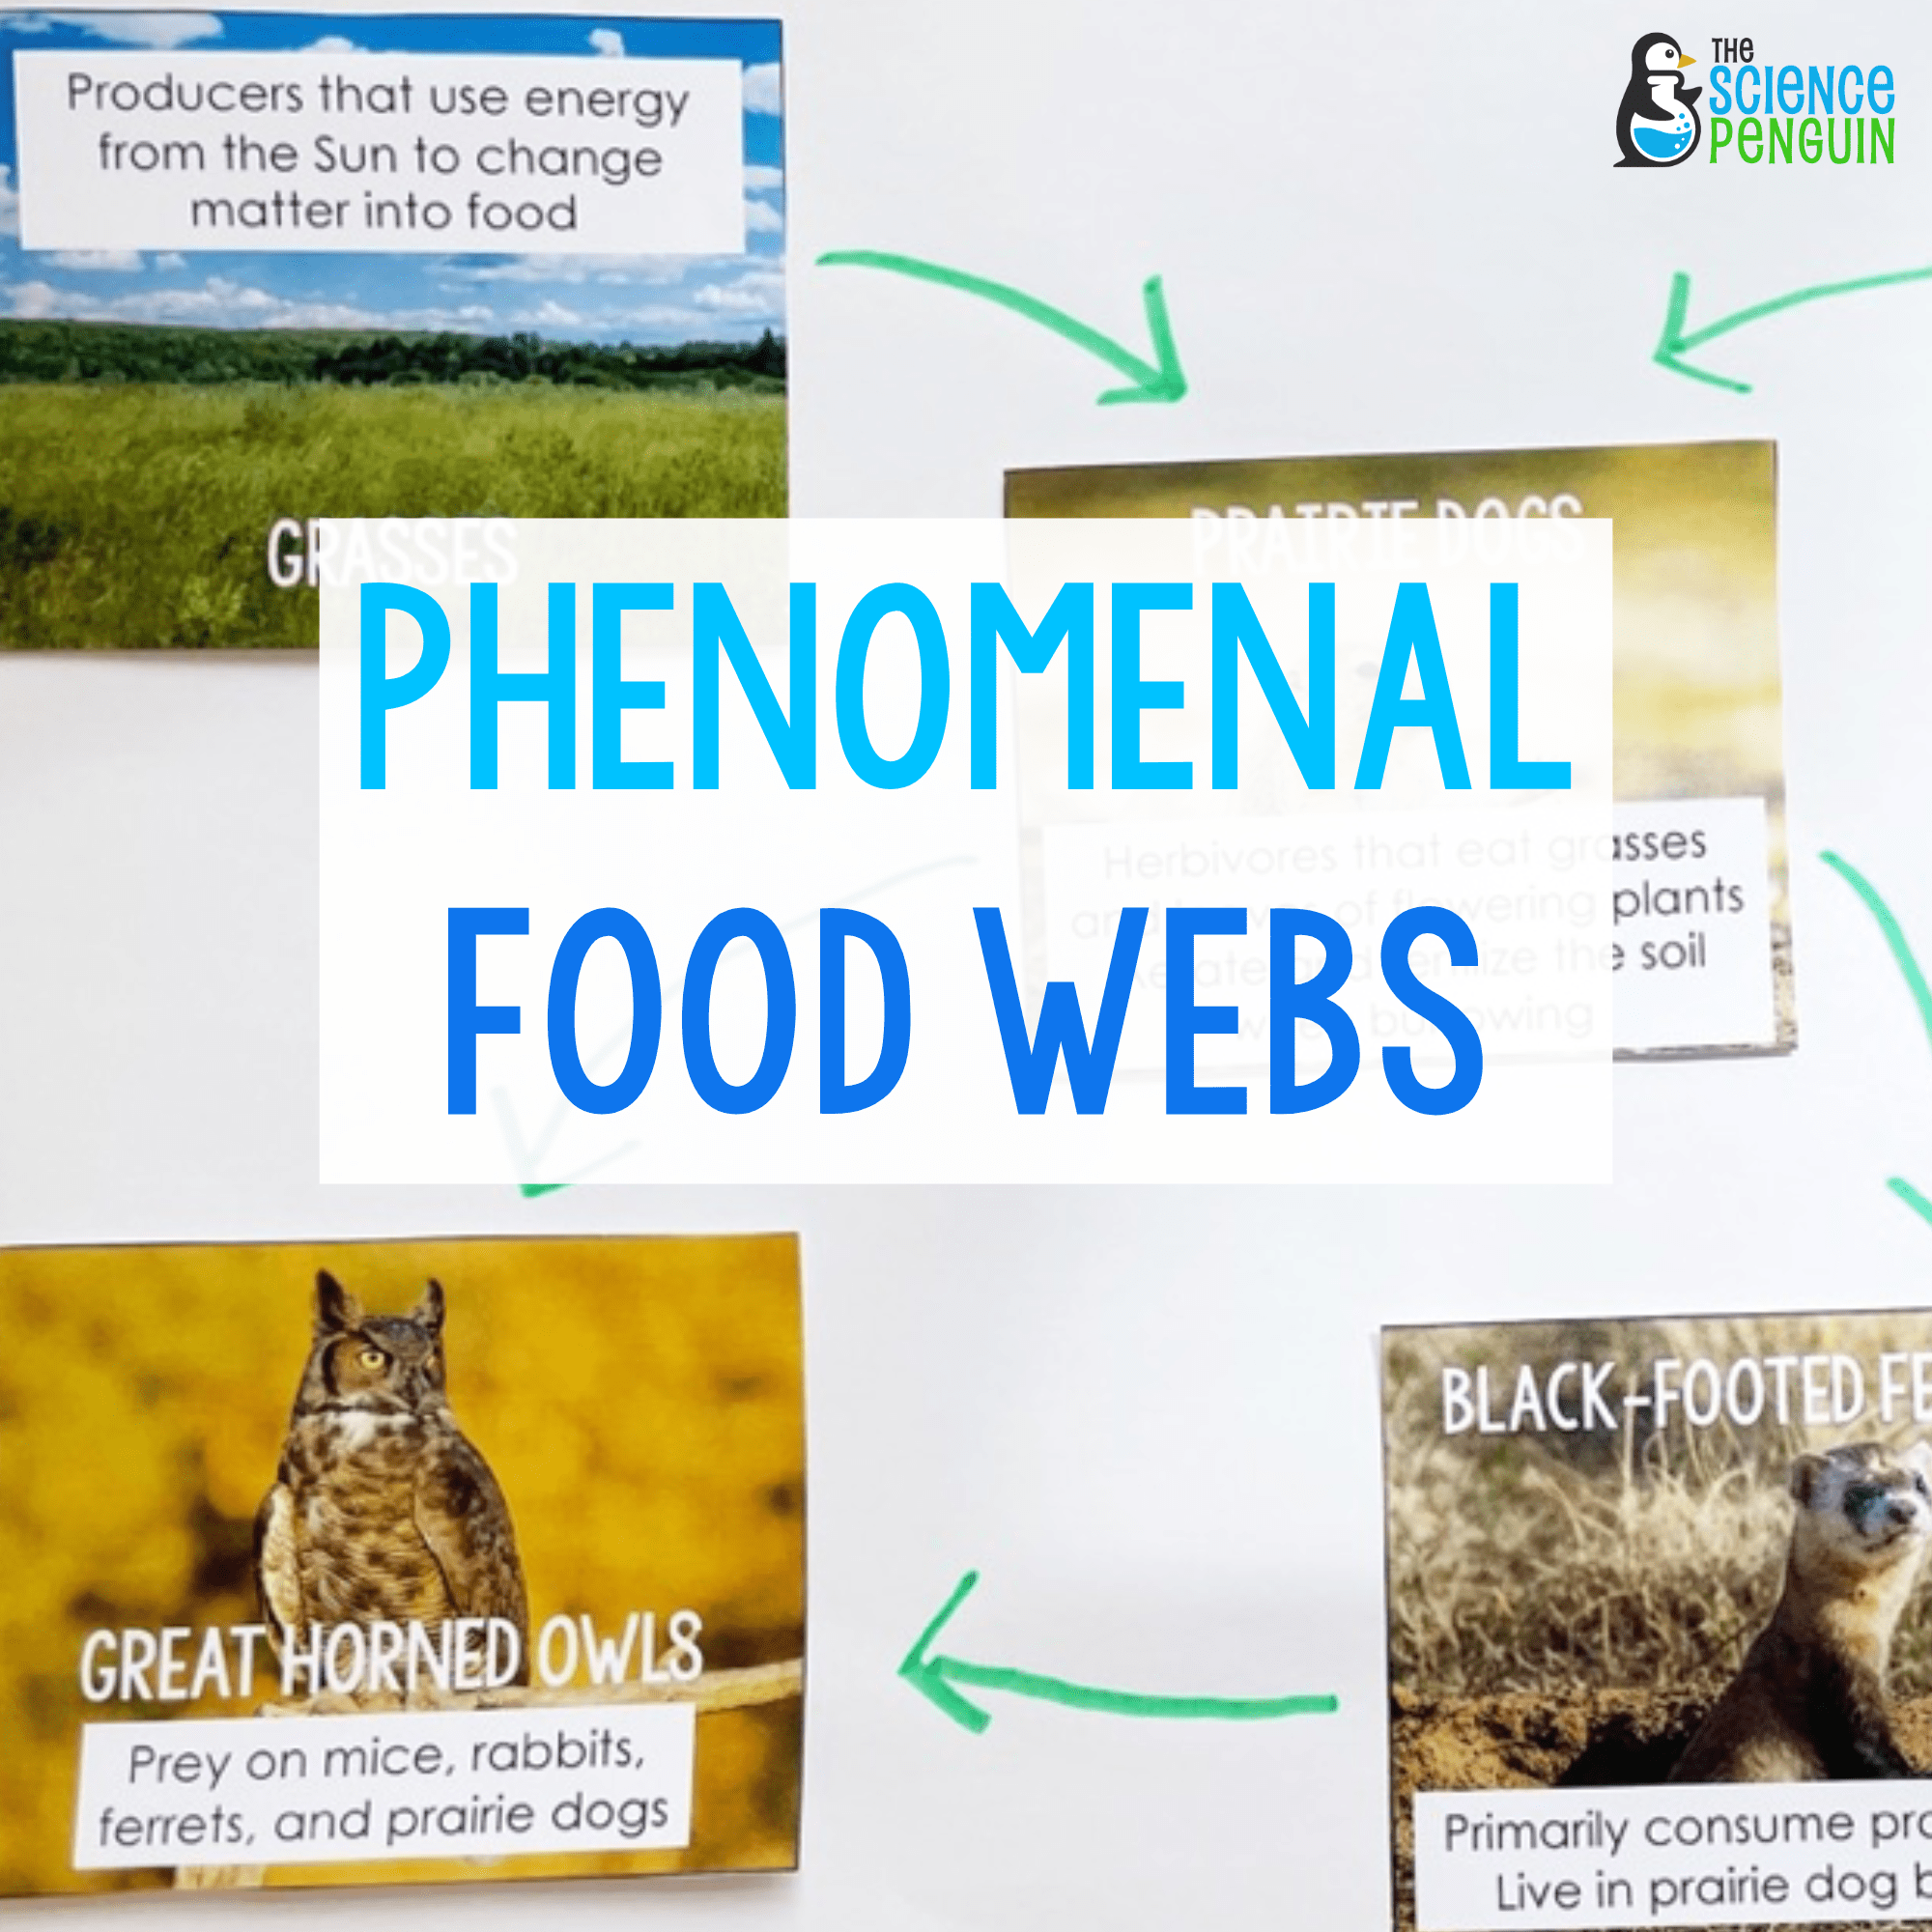 PHENOMENAL Food Webs: Teaching the 5th grade NGSS food webs standard with a  focus on keystone species — The Science Penguin